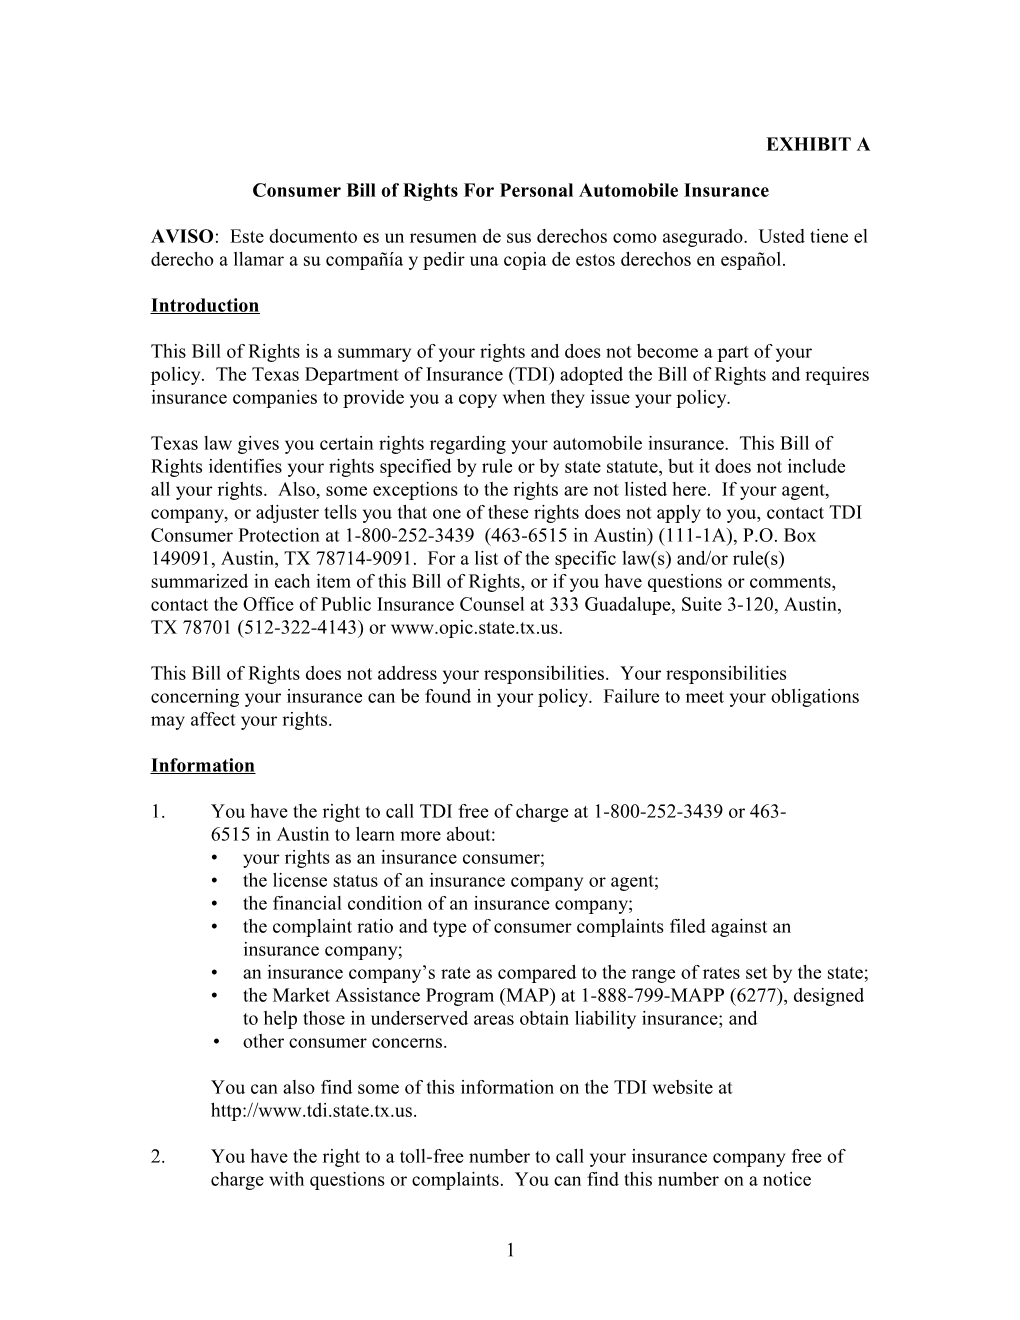 Consumer Bill of Rights for Personal Automobile Insurance